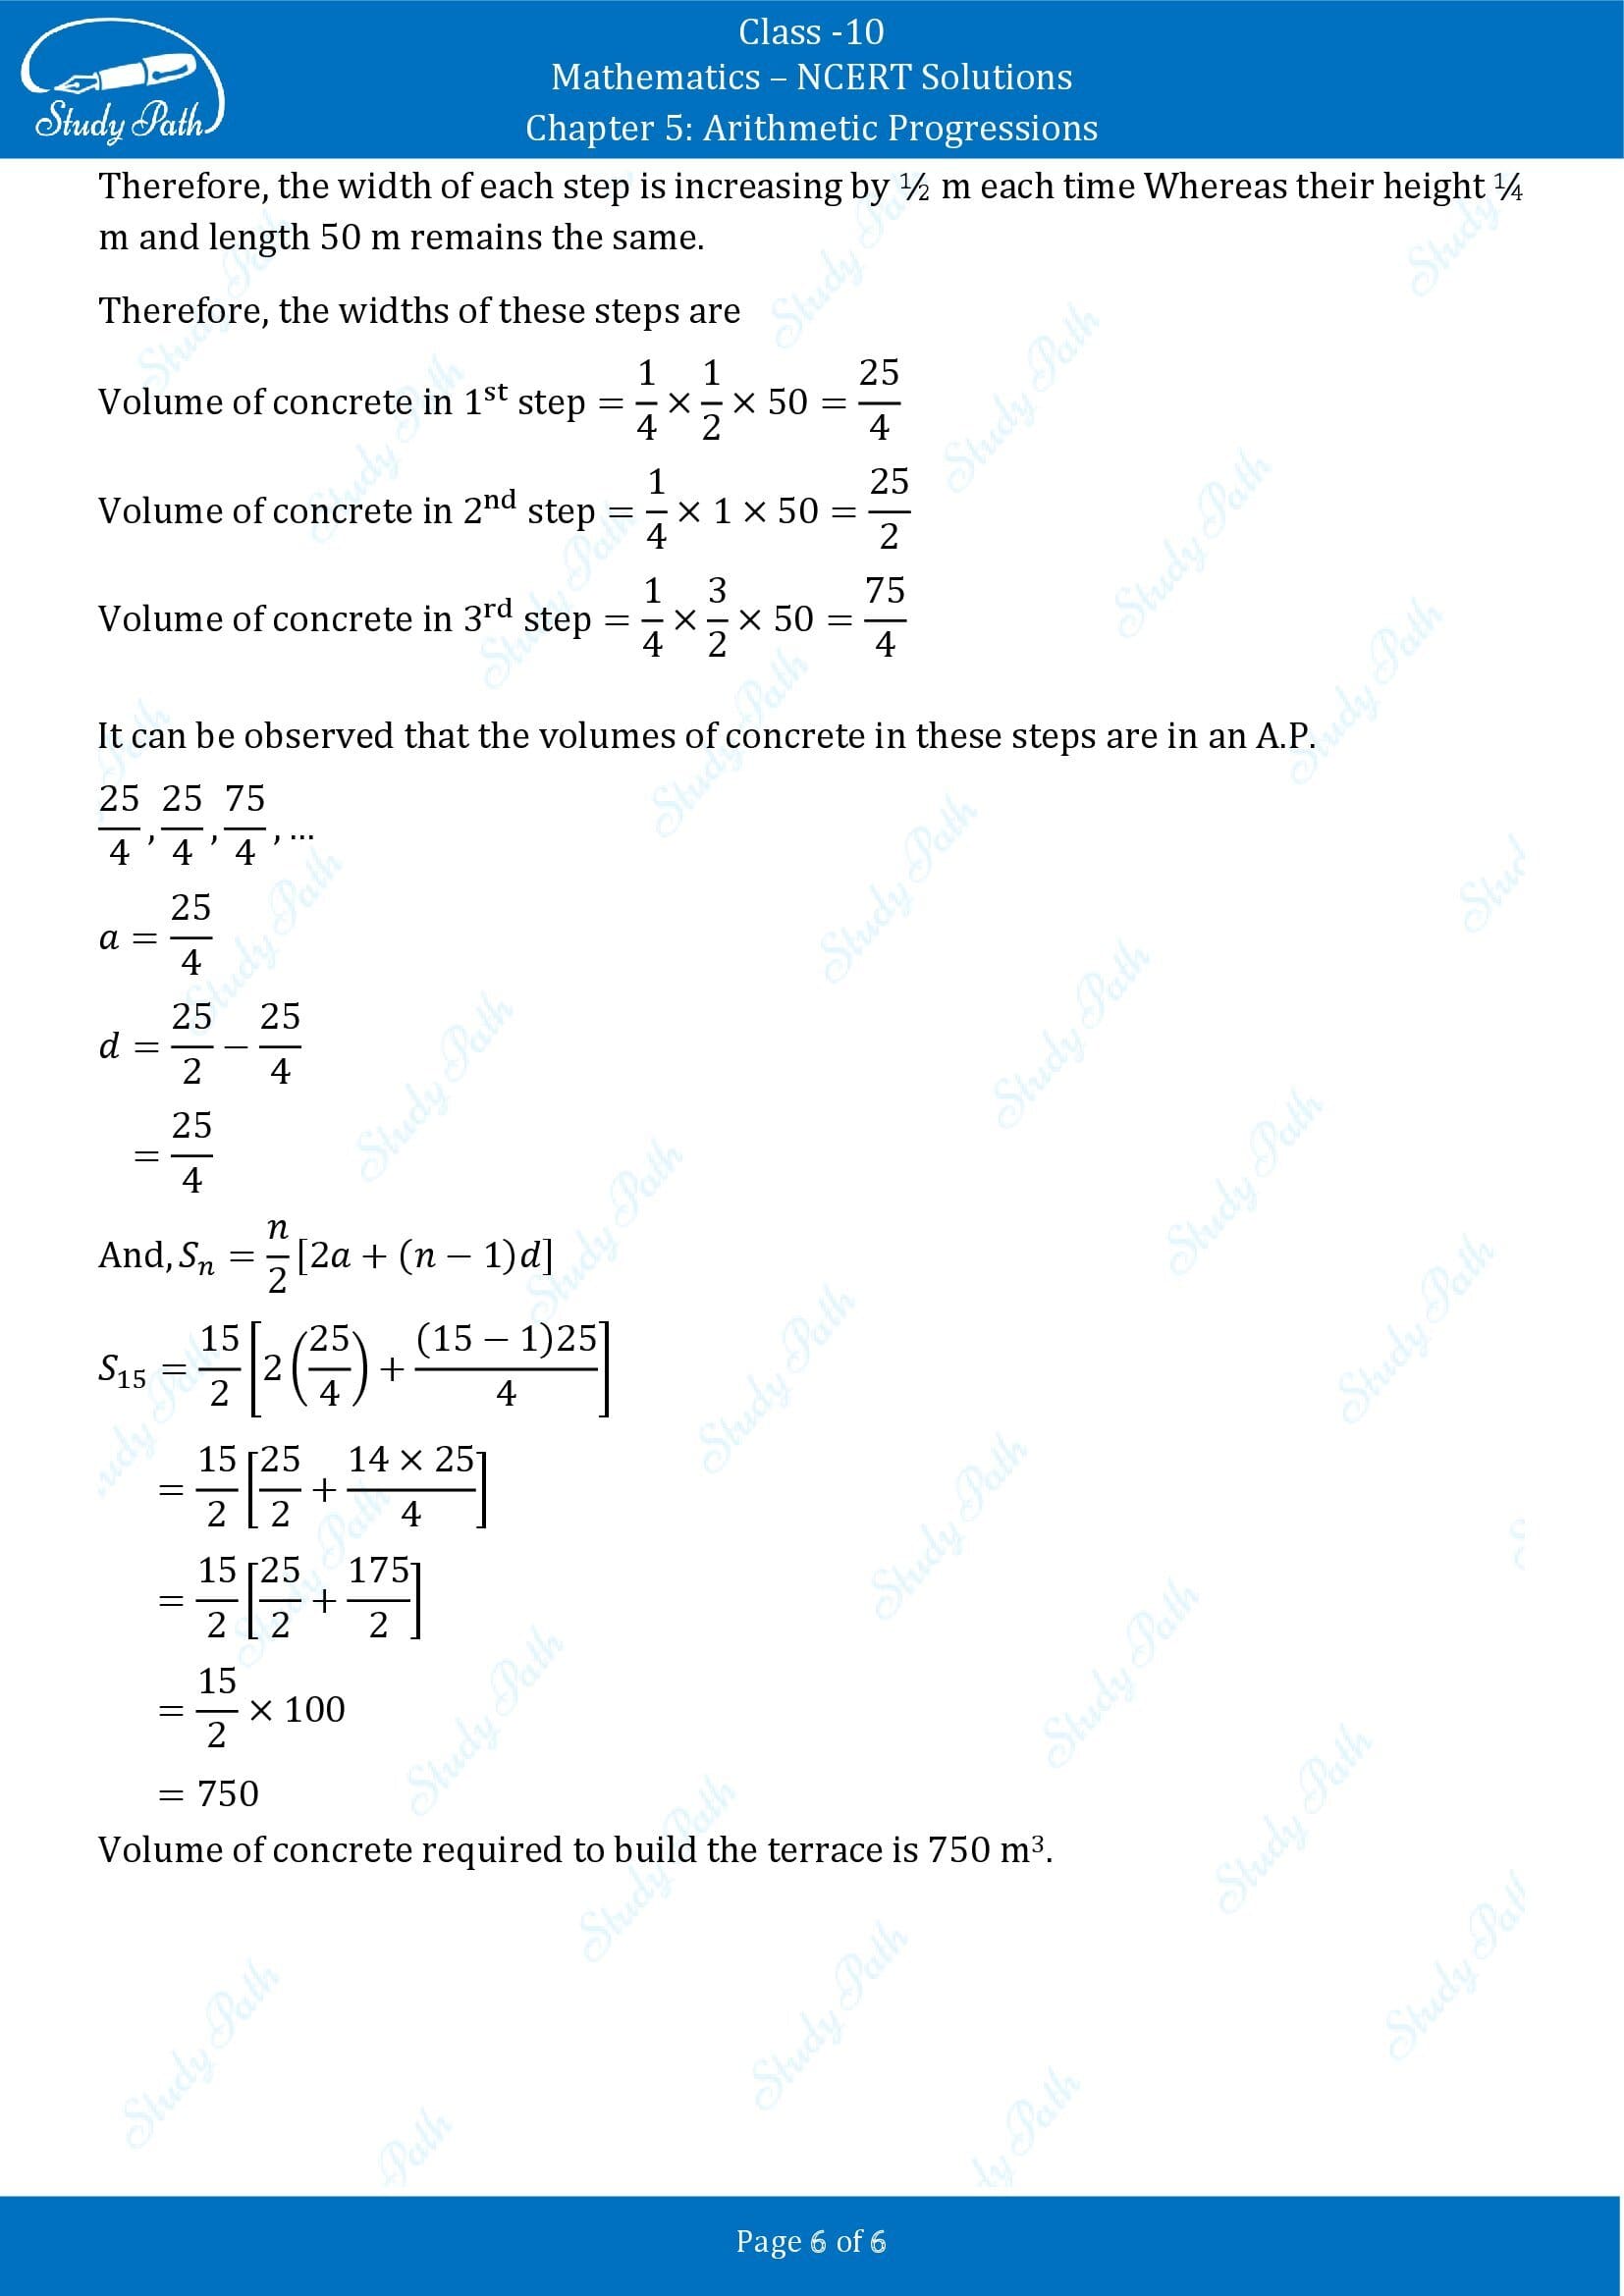 NCERT Solutions for Class 10 Maths Chapter 5 Arithmetic Progressions Exercise 5.4 00006